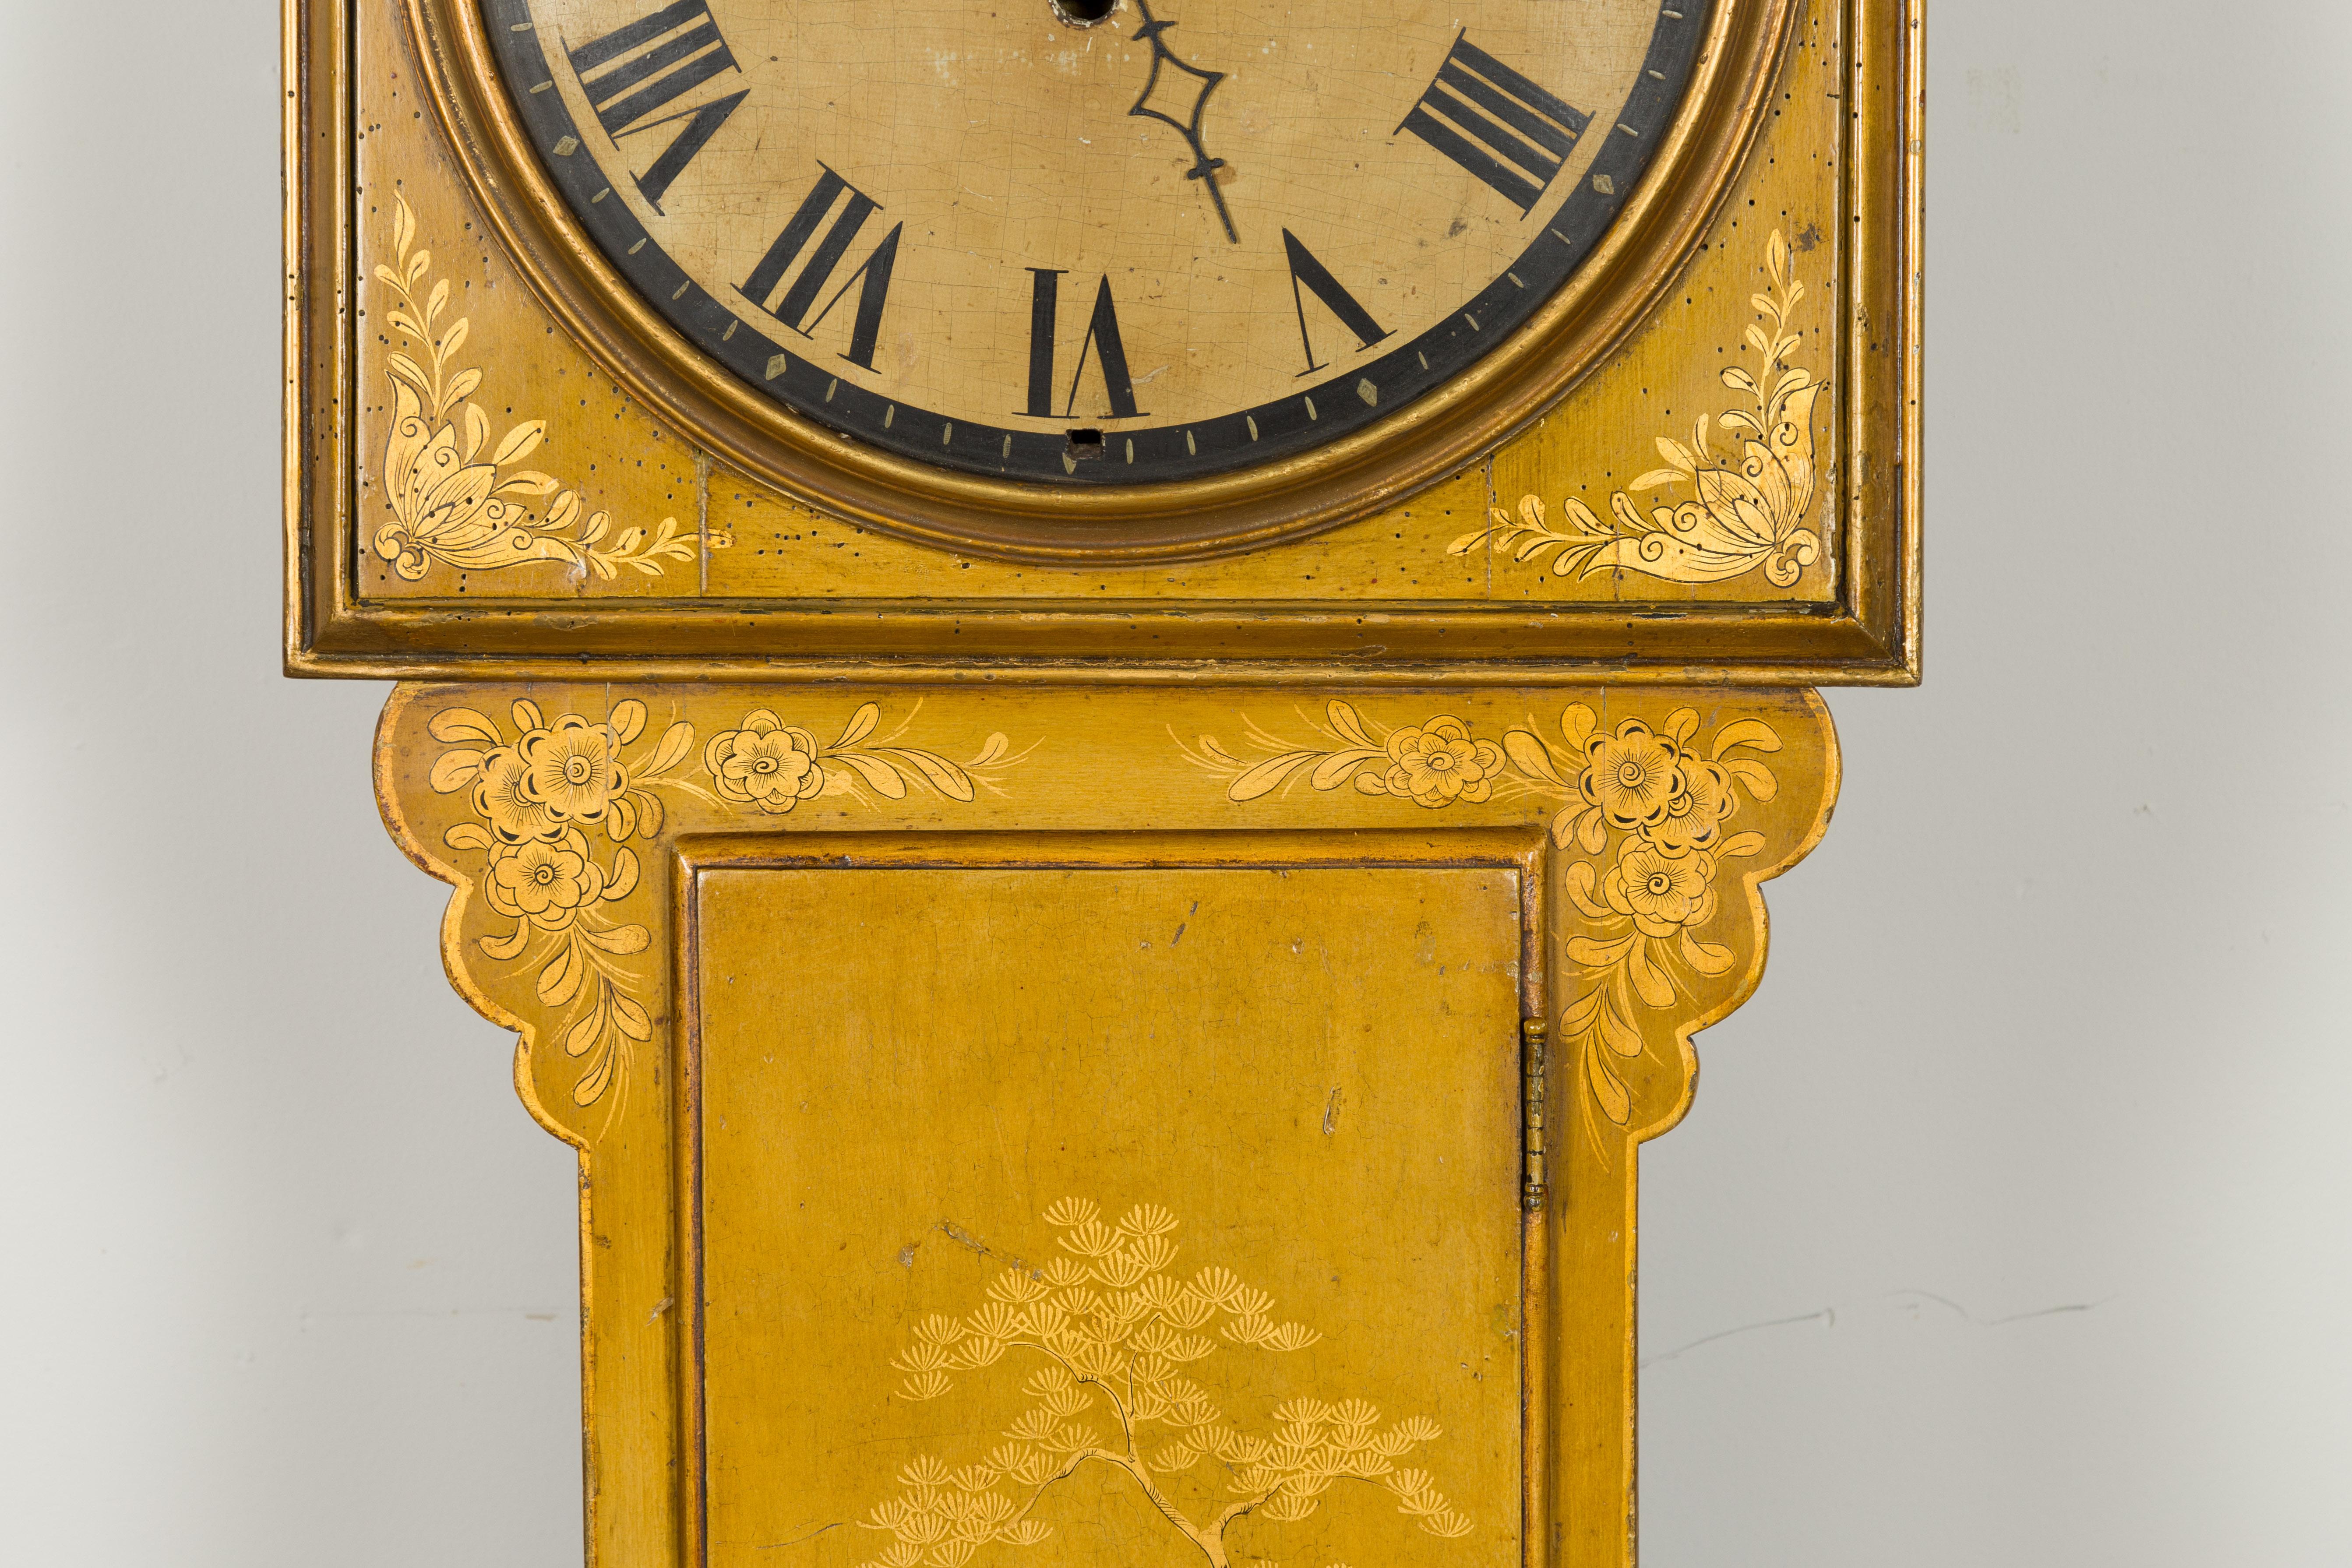 English Regency Period 1820s Golden Toned Wall Clock with Chinoiserie Décor For Sale 1